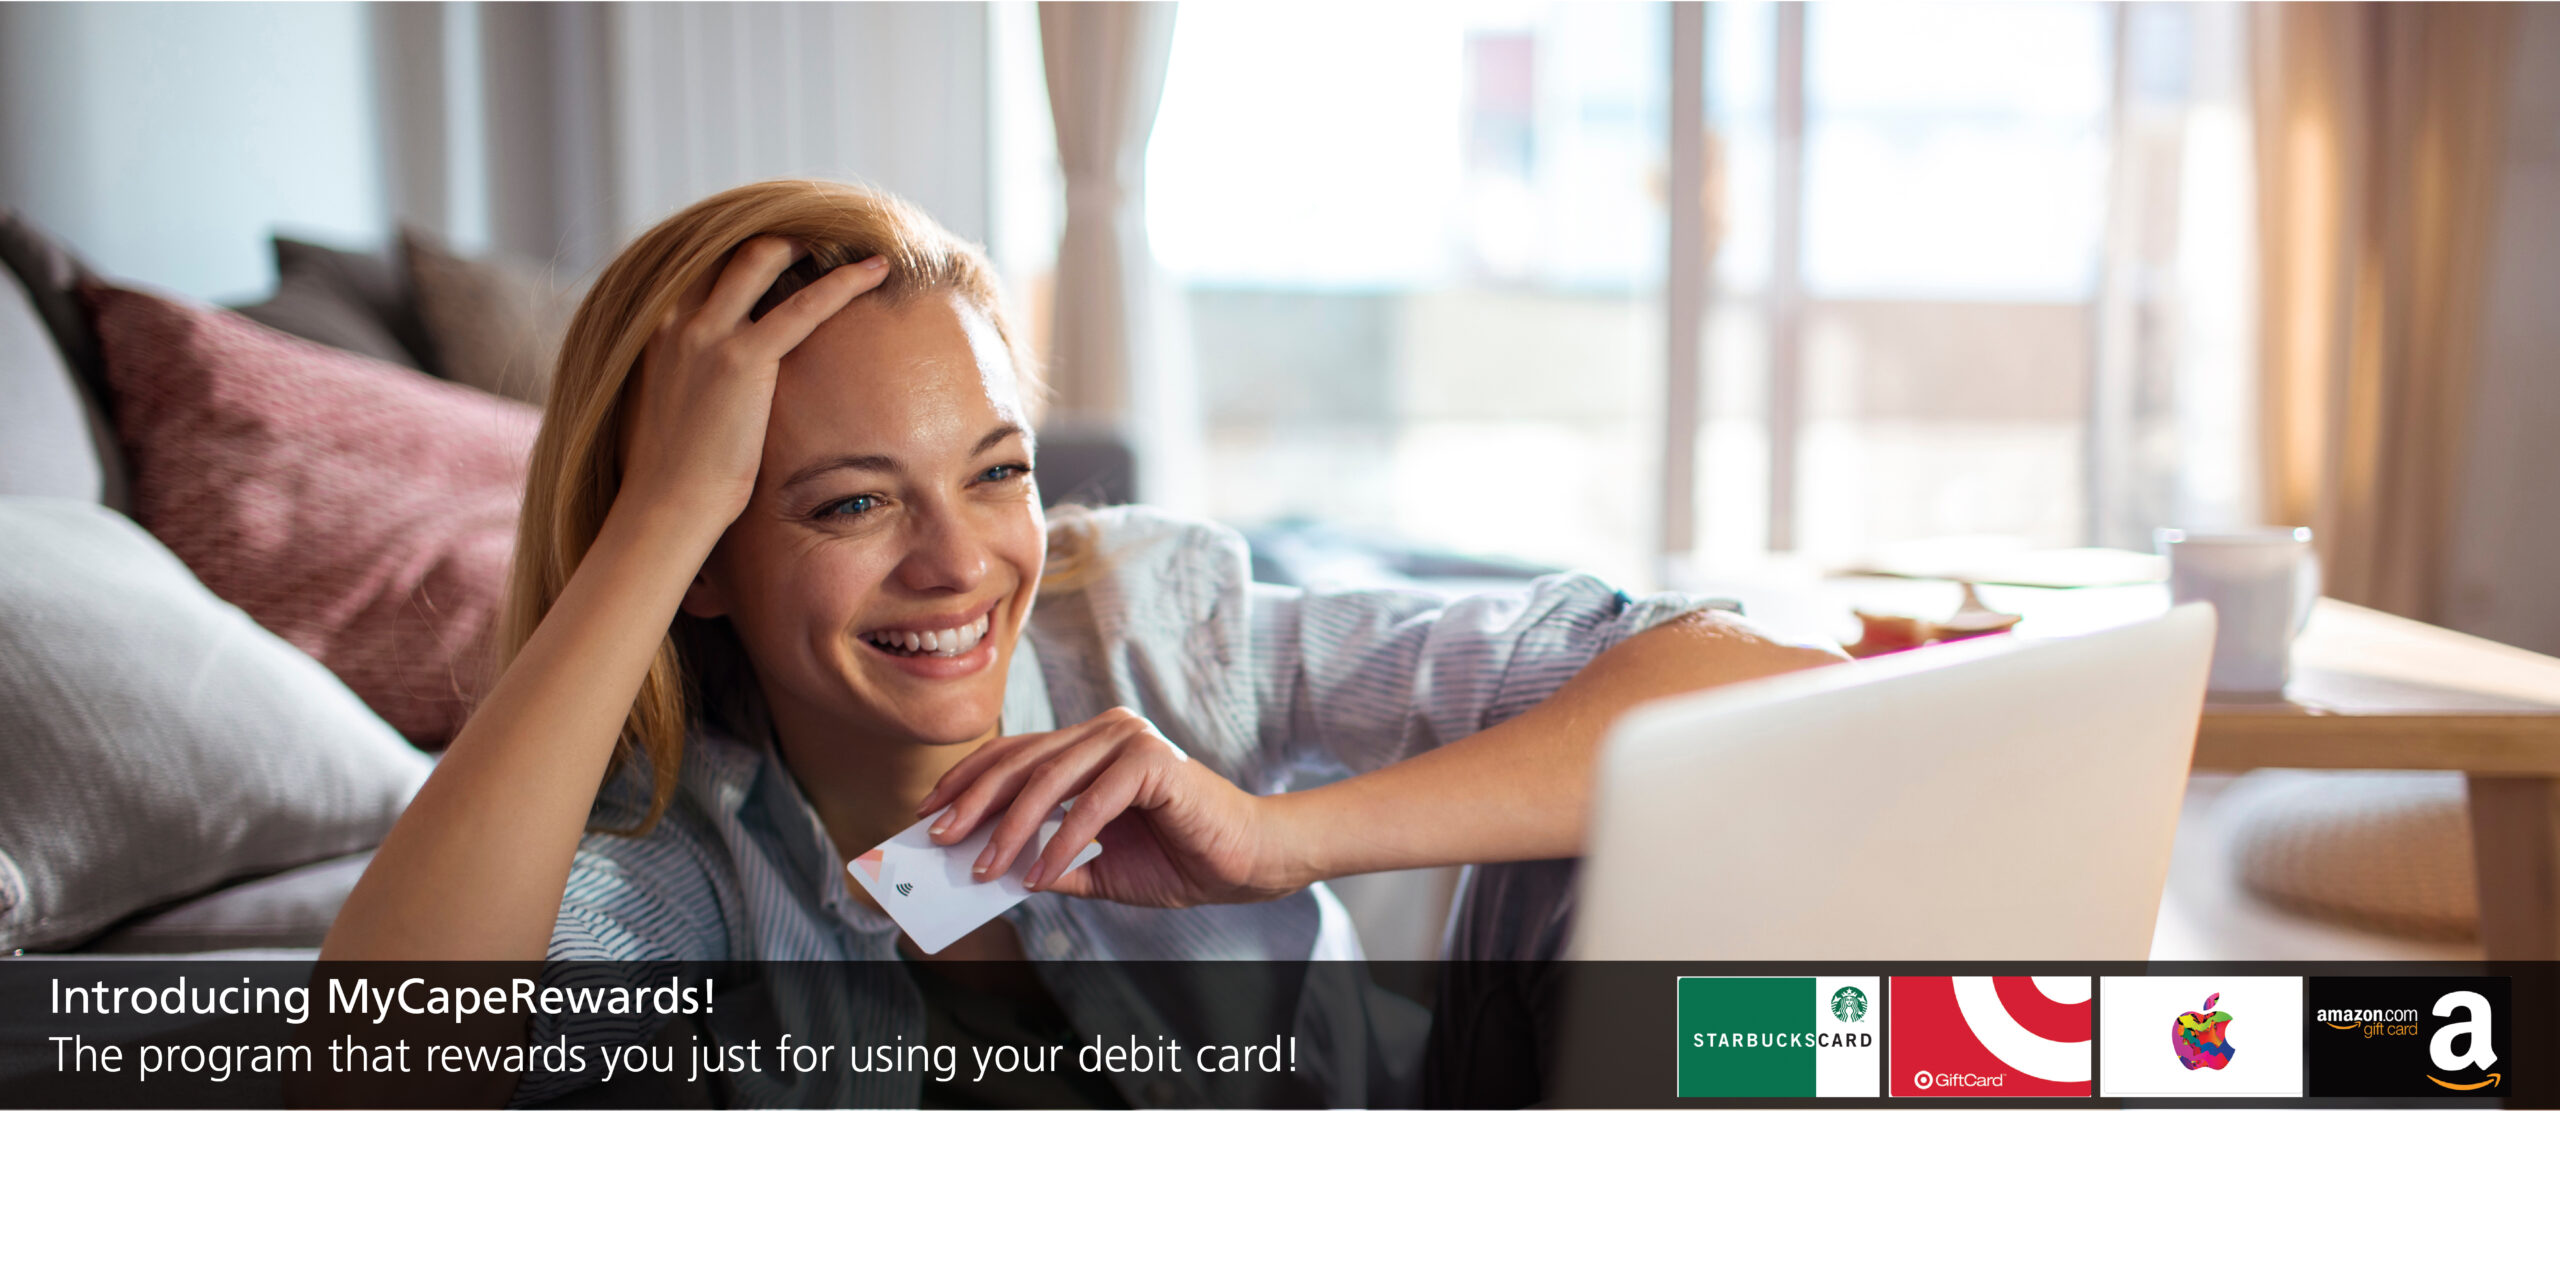 Introducing MyCapeRewards! Get rewarded just for using your debit card. Image of woman online shopping from home with her debit card and various gift cards pictured from merchants like Starbucks, Target, Amazon, etc.